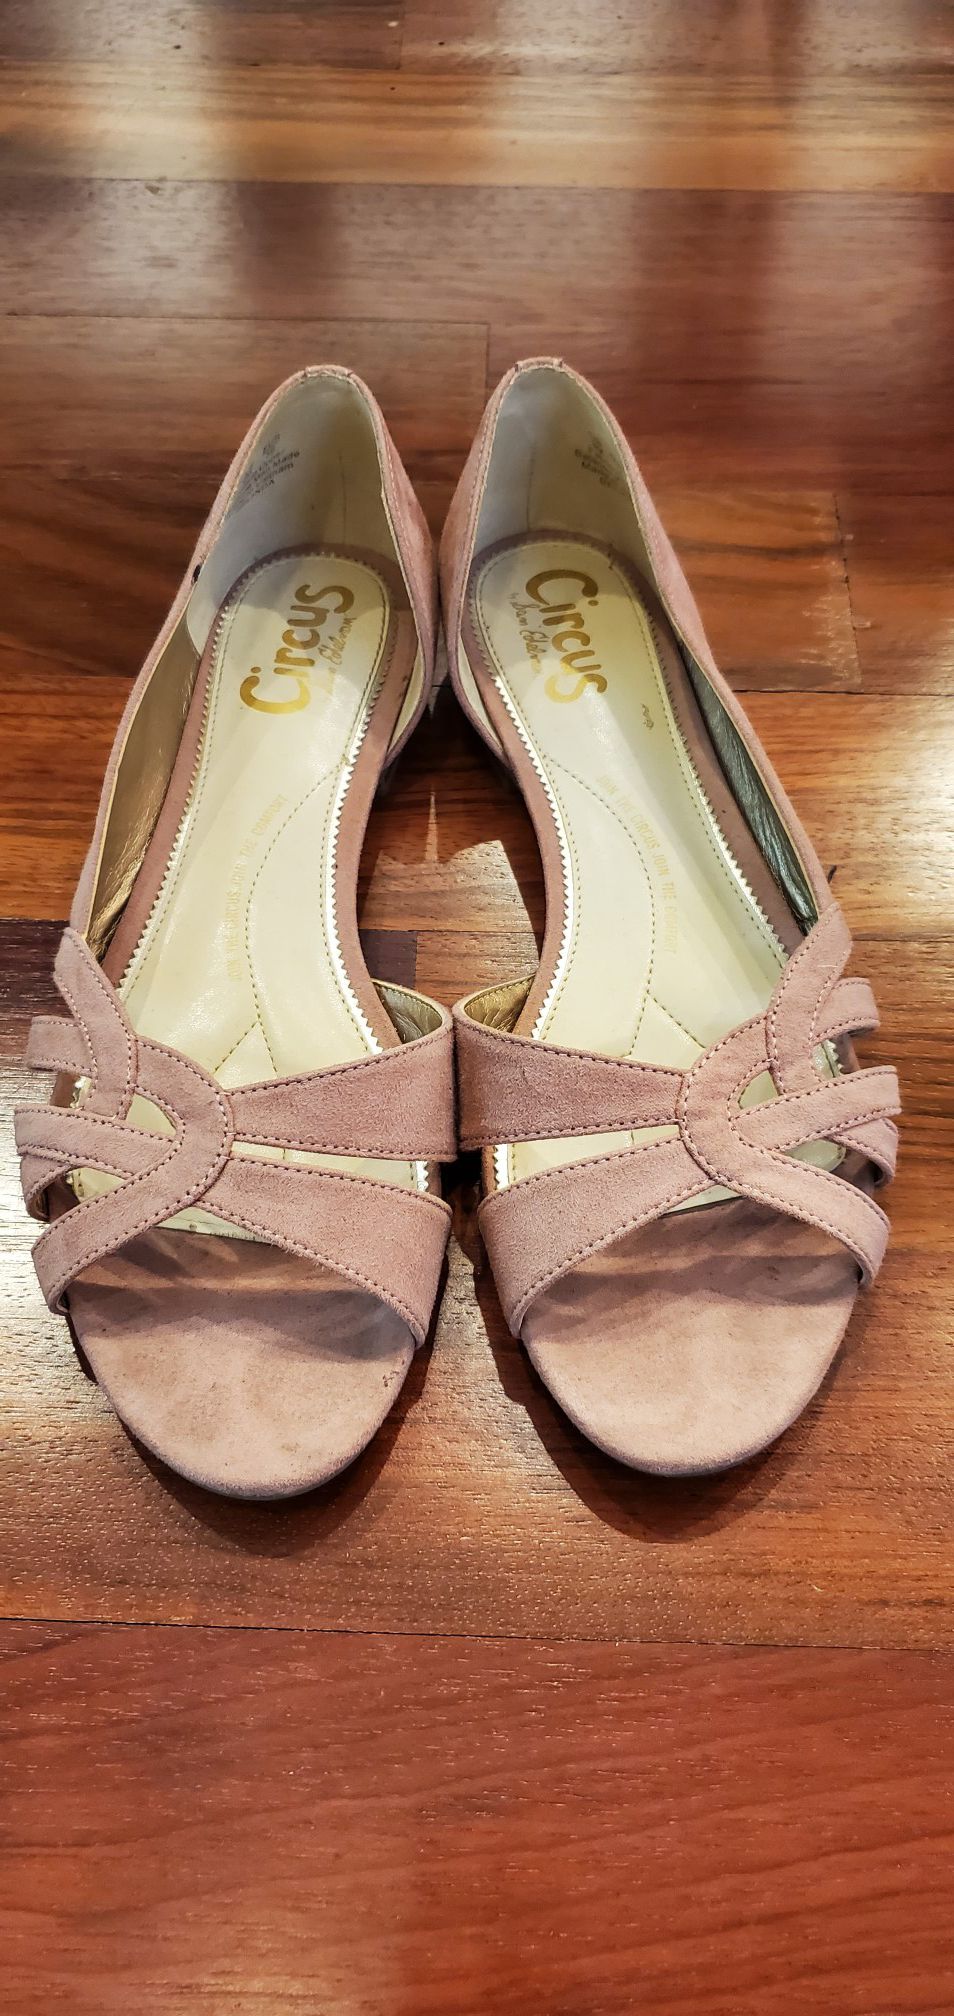 Ballet shoes flats size 9 pink suede